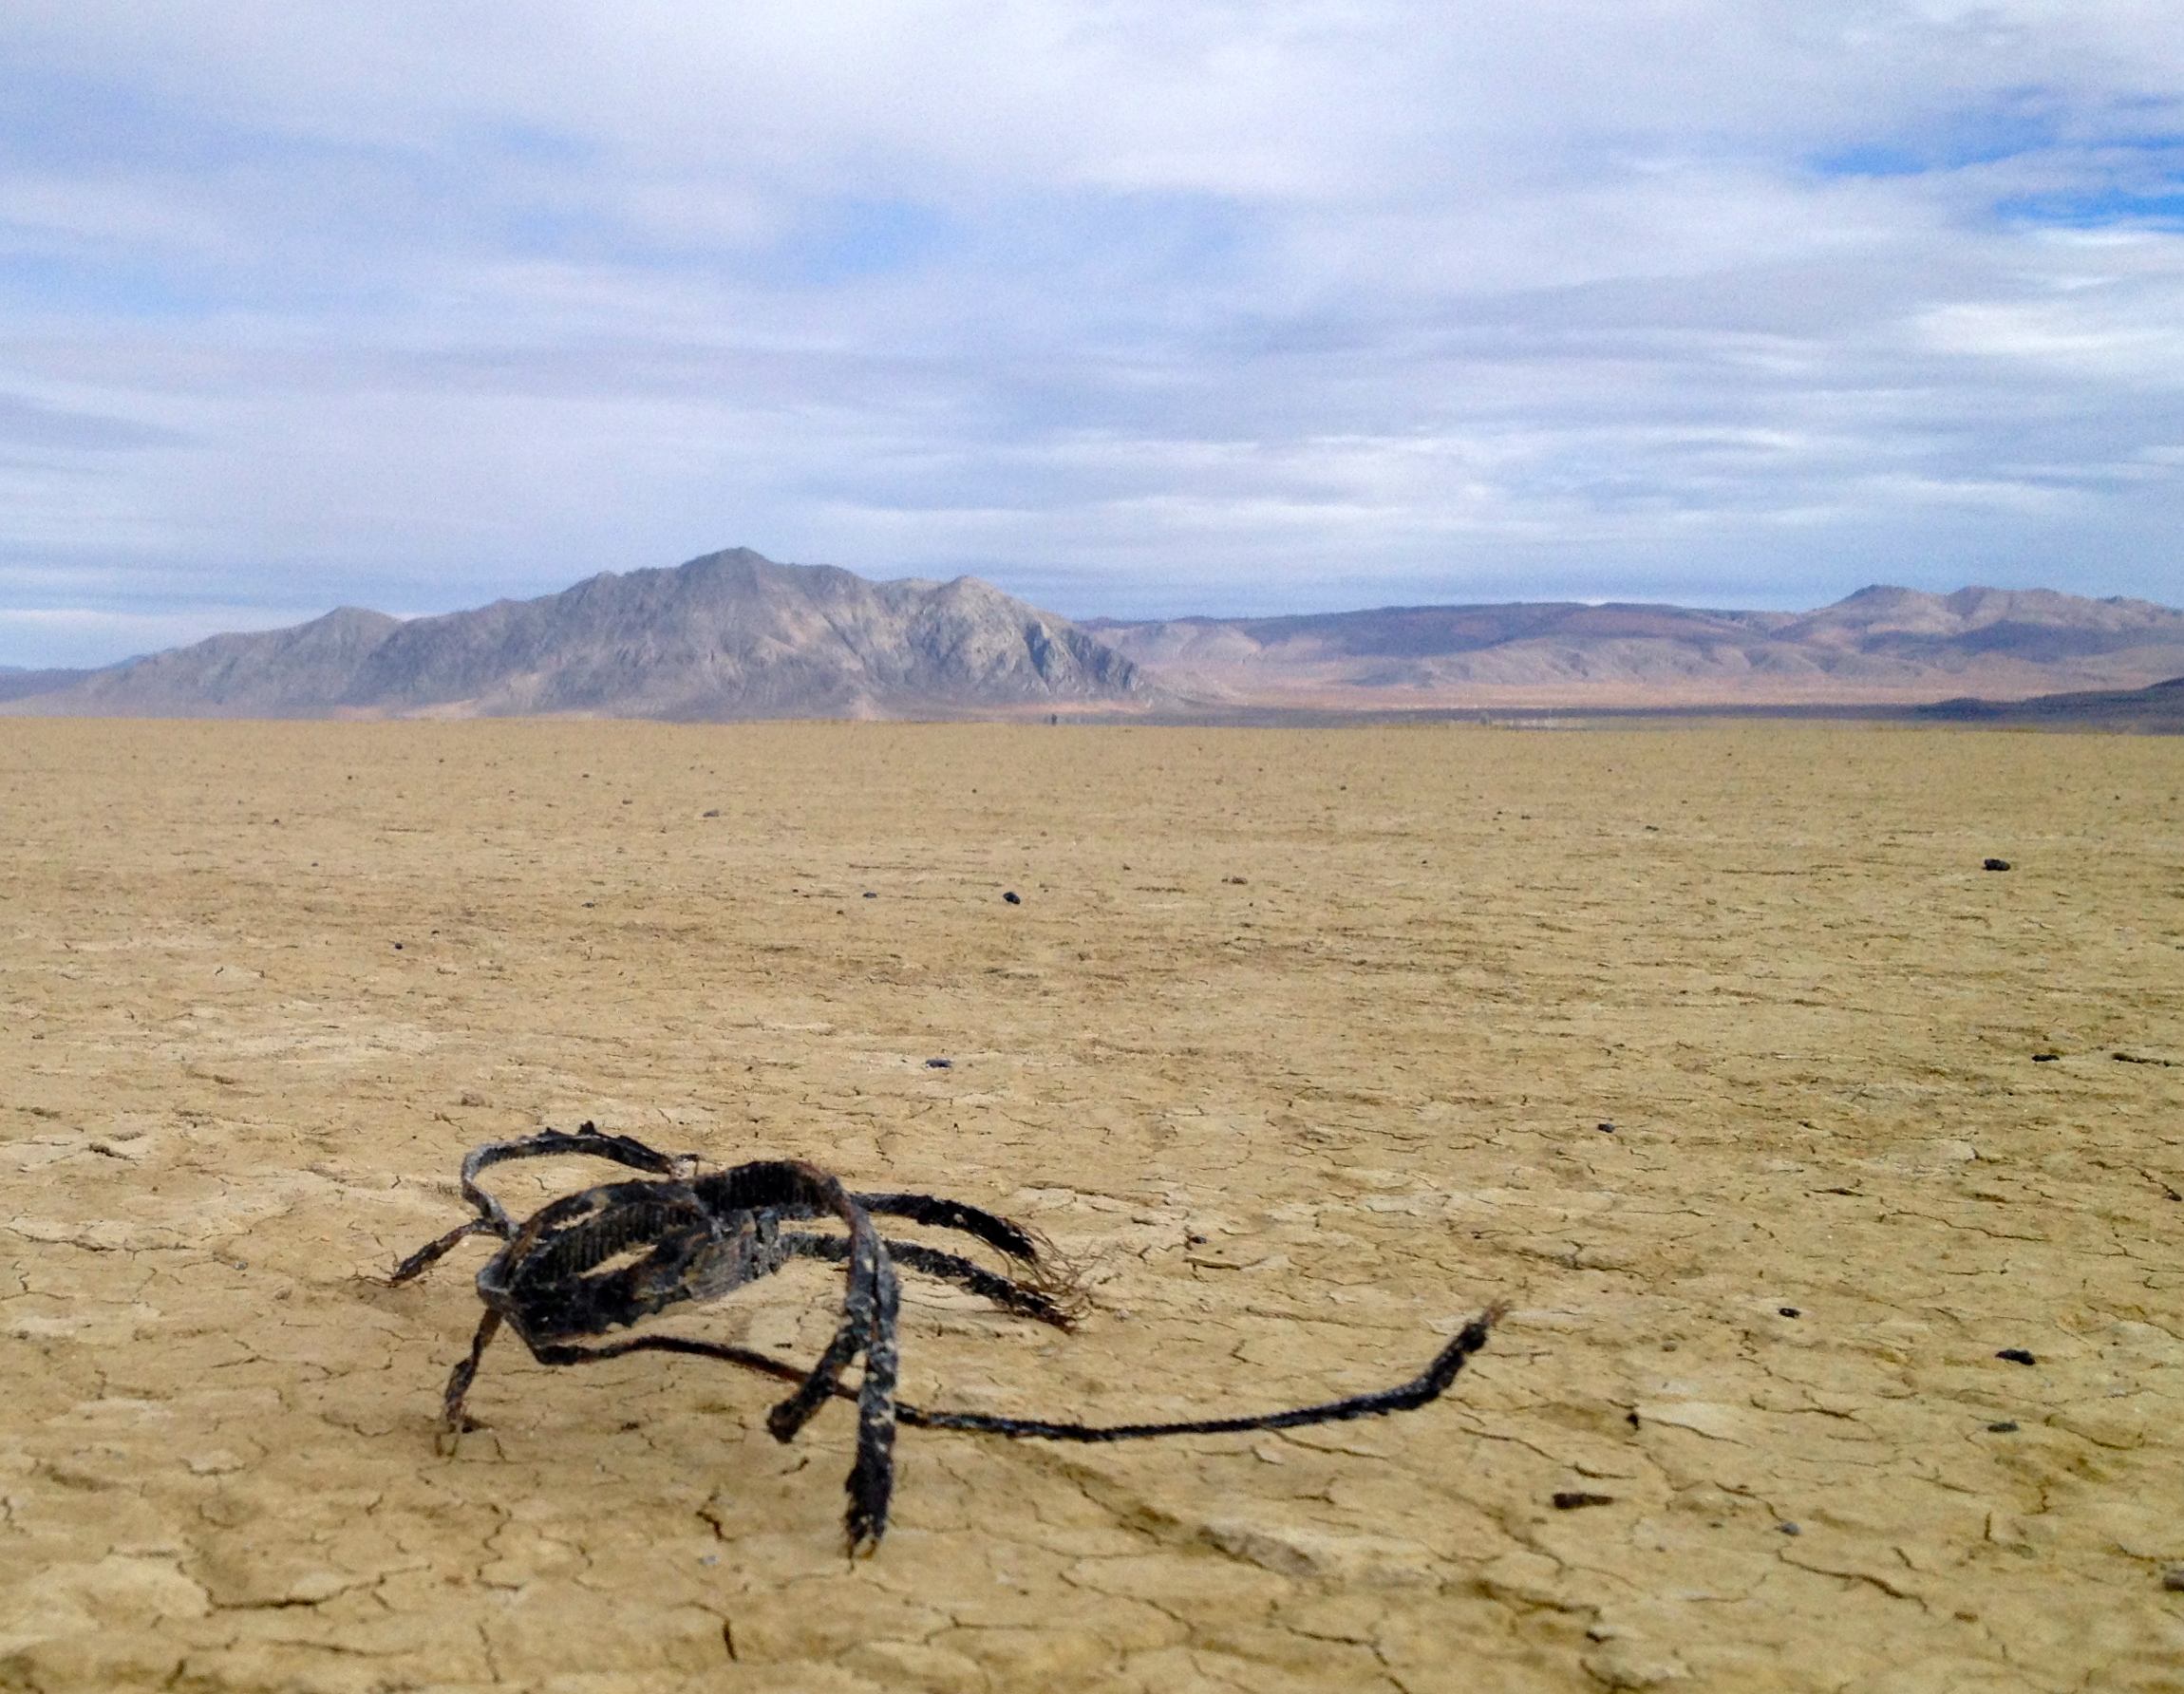 Here we uh, encounter the uh, rarely seen and even less frequently photographed FRAYWIRE ZIPTIE SCORPION of the Black Rock Desert. The DPW have captured a few of these creatures and are trying to train them to eat wood chips. So far the Fraywires are unresponsive but maybe they're frightened or dehydrated.